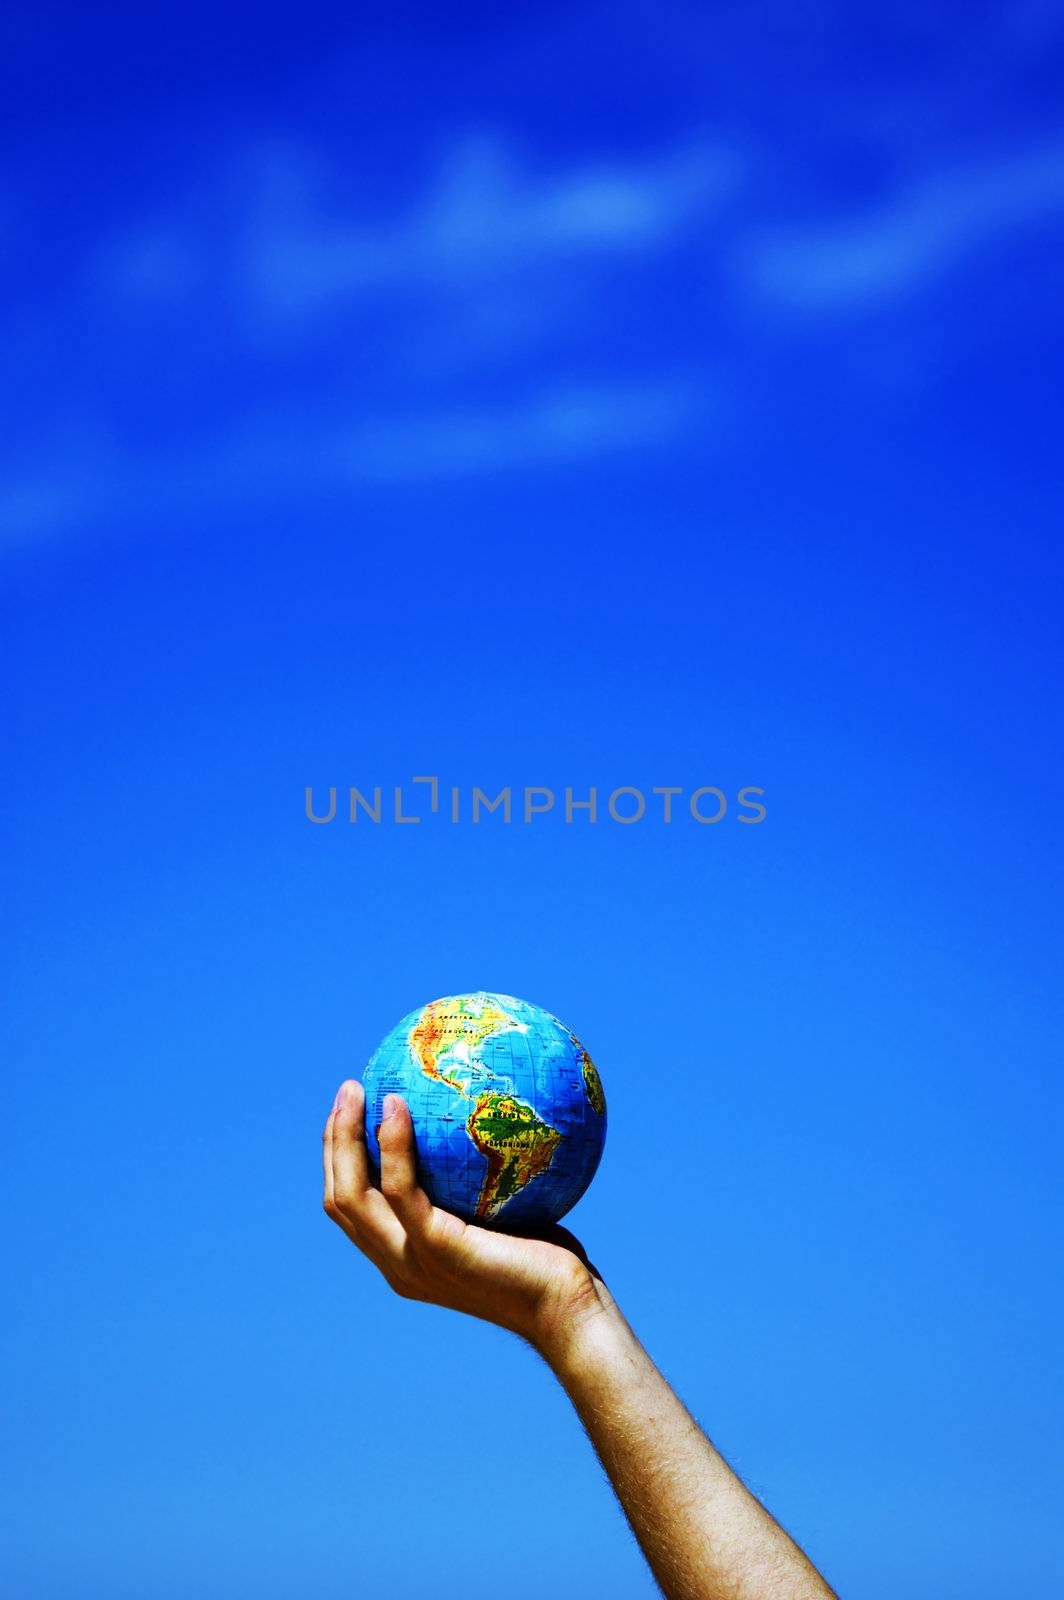 Earth globe in hand protected. Ideal for Earth protection concepts, recycling, world issues, enviroment themes